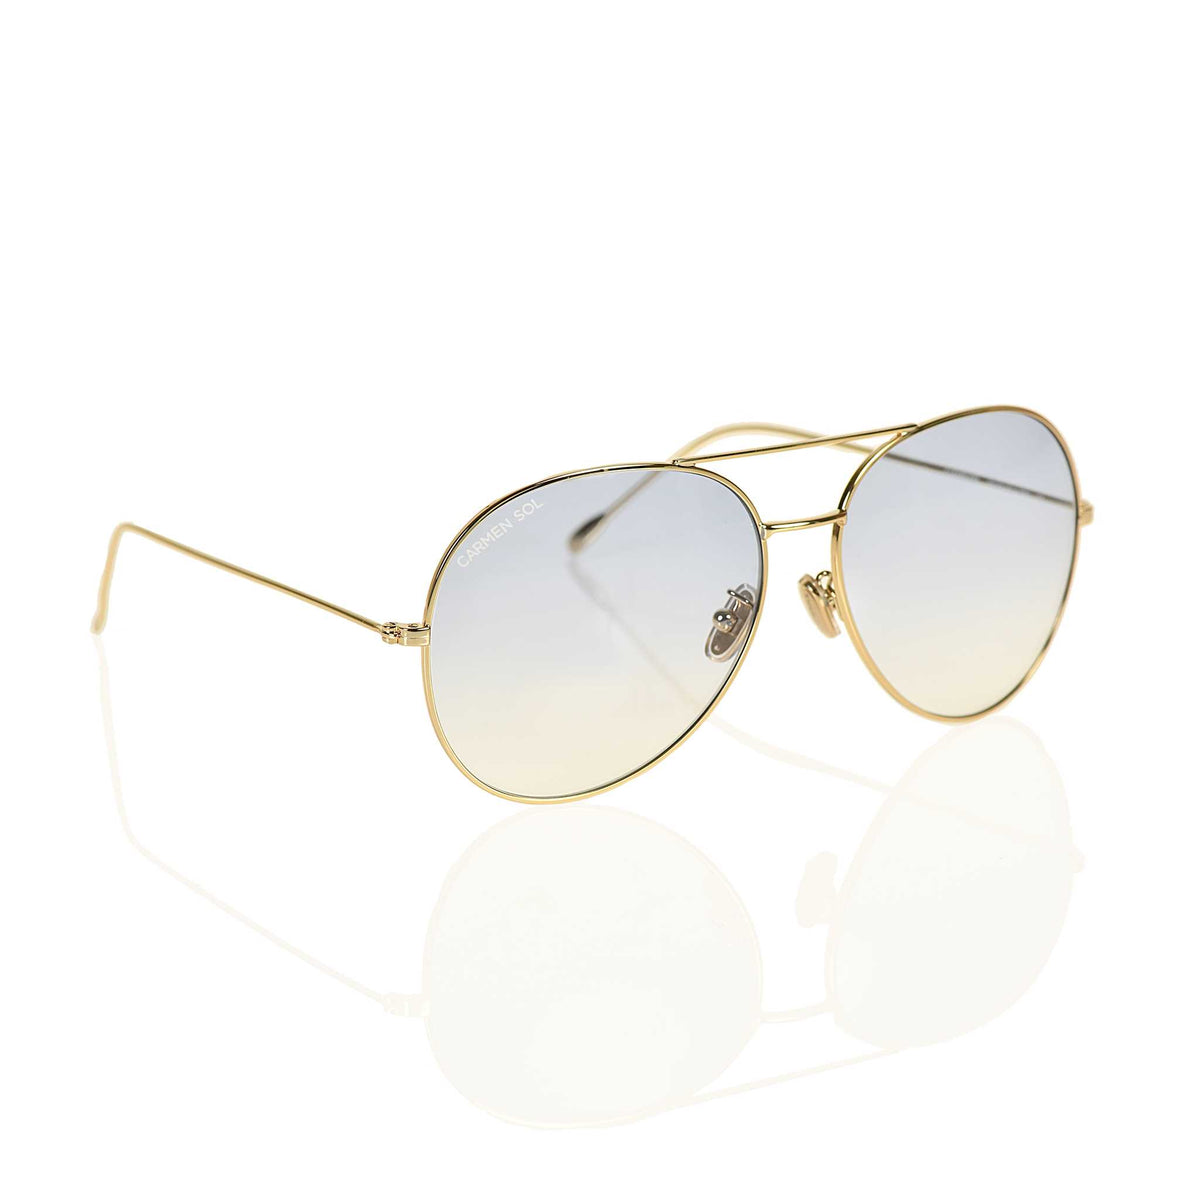 Perfect gift for men for Christmas sunglasses in color gold and lenses in gradient gold